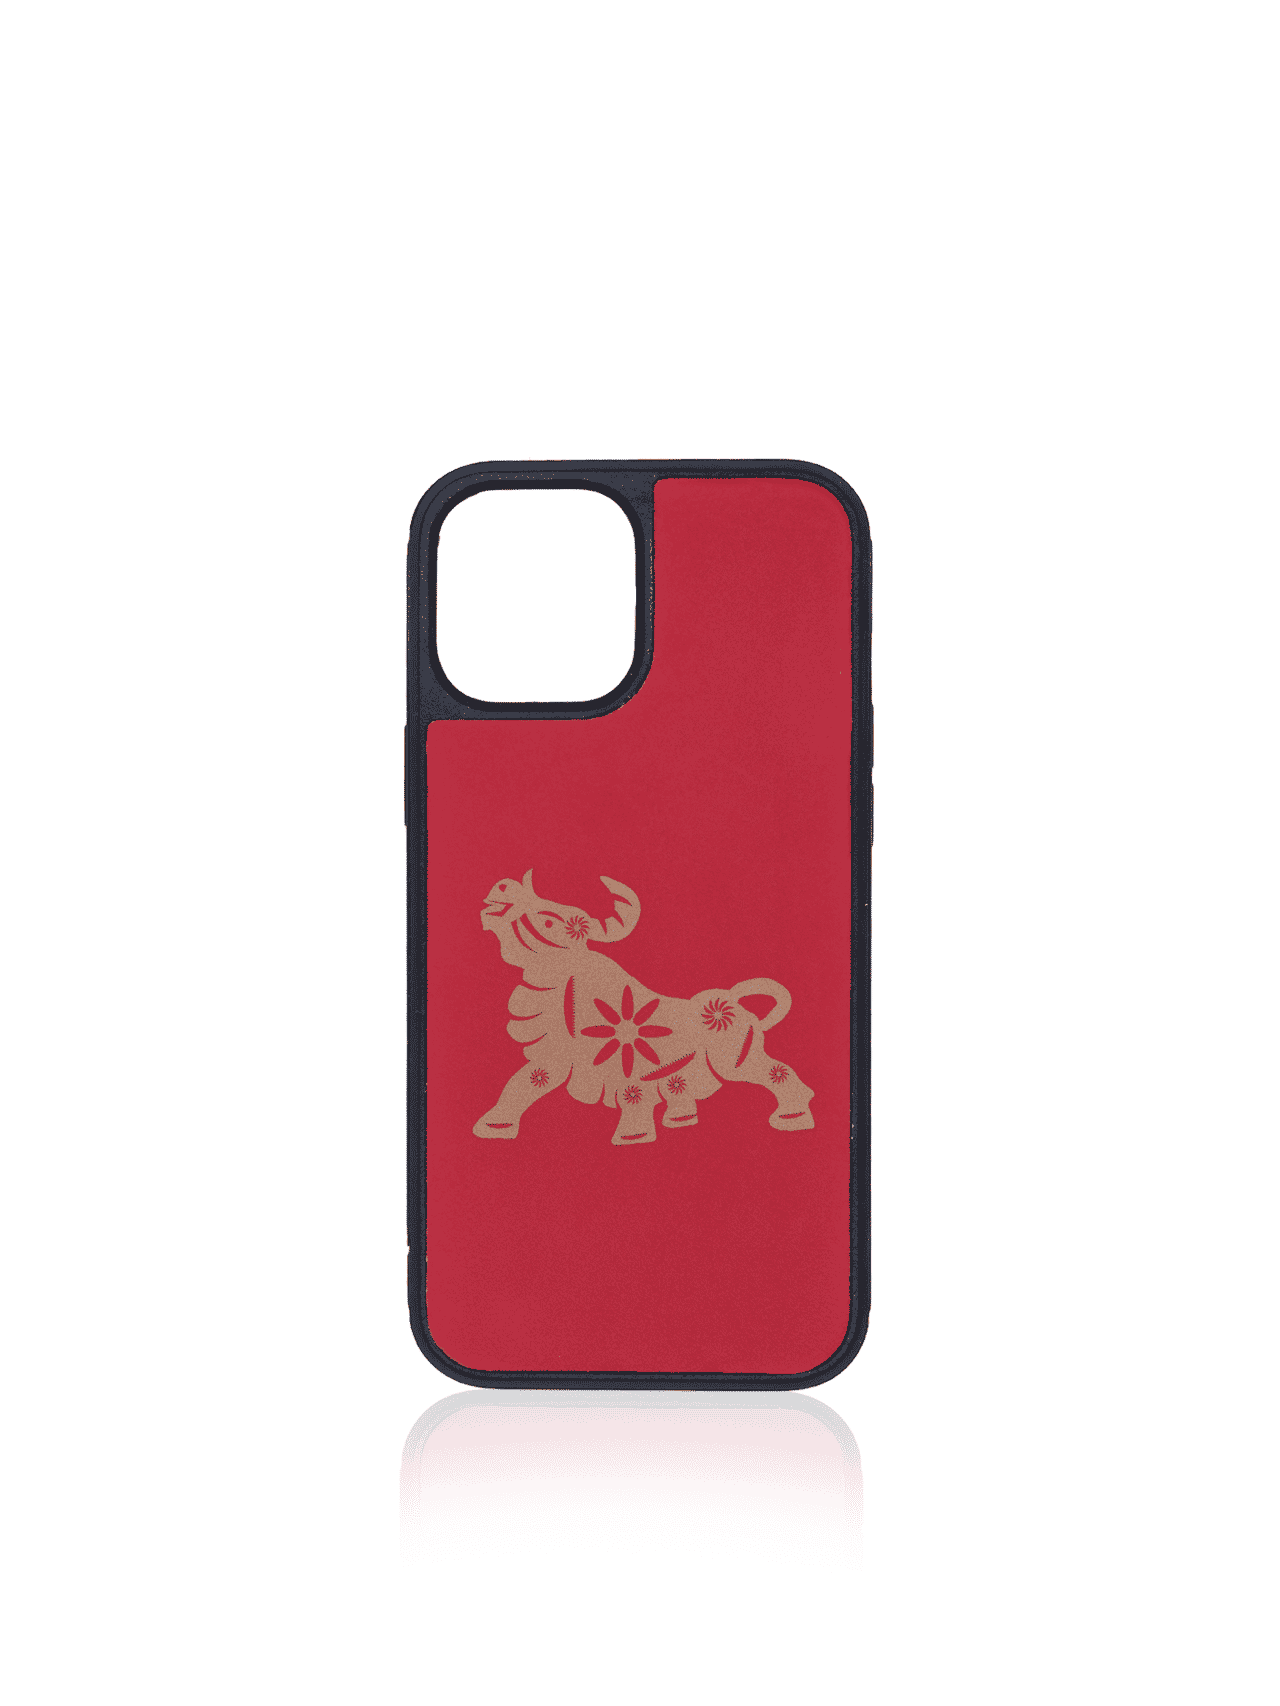 Iphone case red bull gold apple